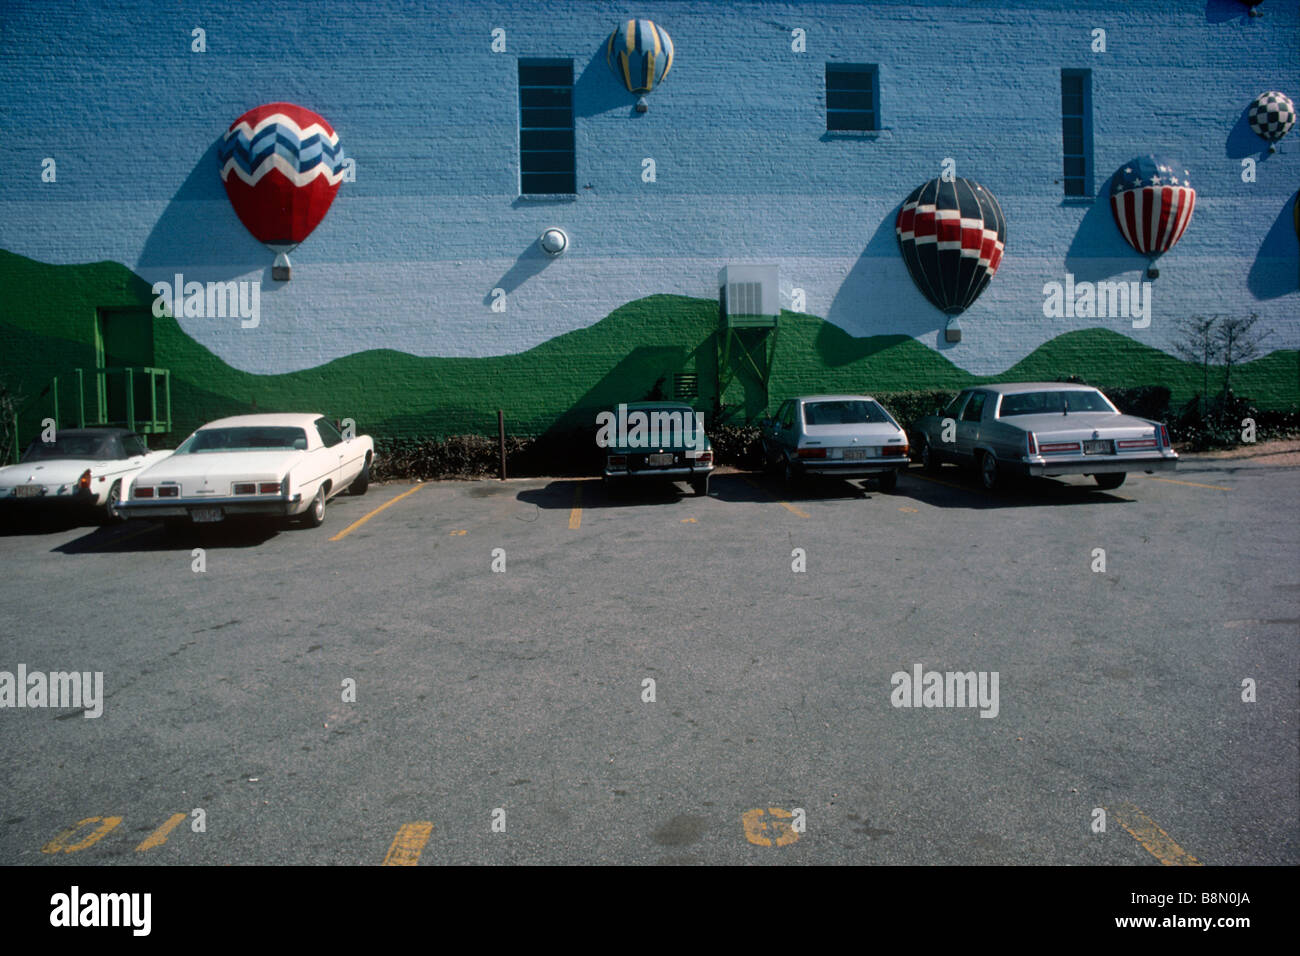 Parking lot with three dimensional graphic wall. Stock Photo